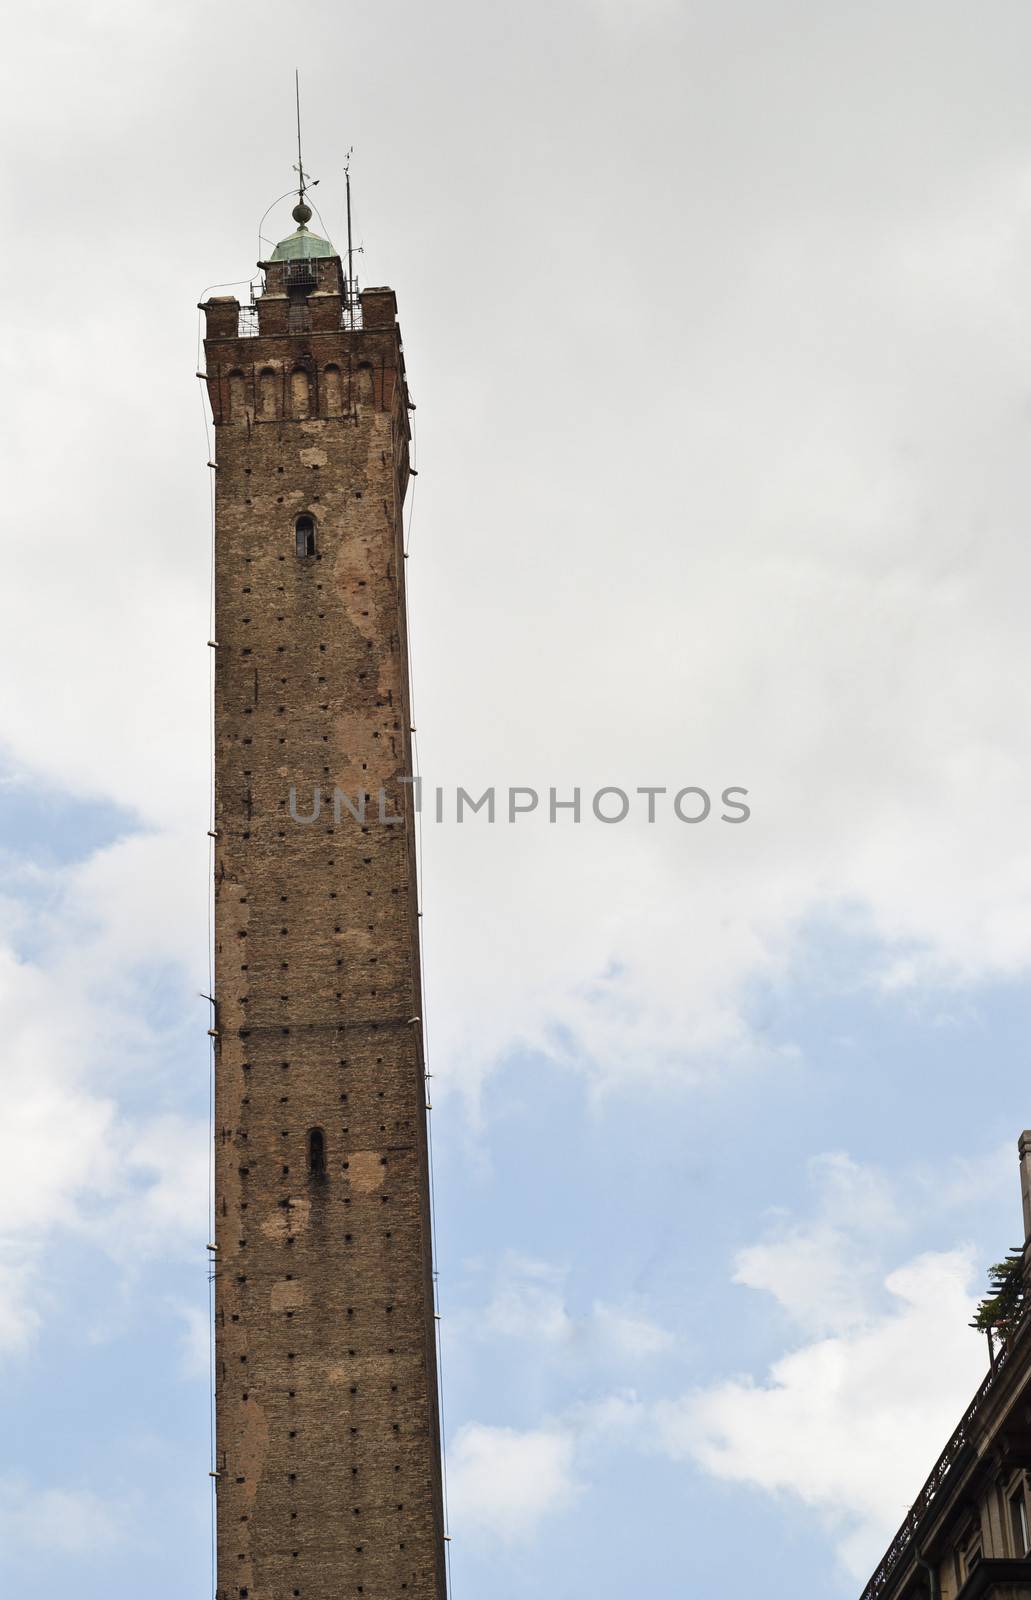 View from the street to the Asinelli Tower in Bologna, Italy.